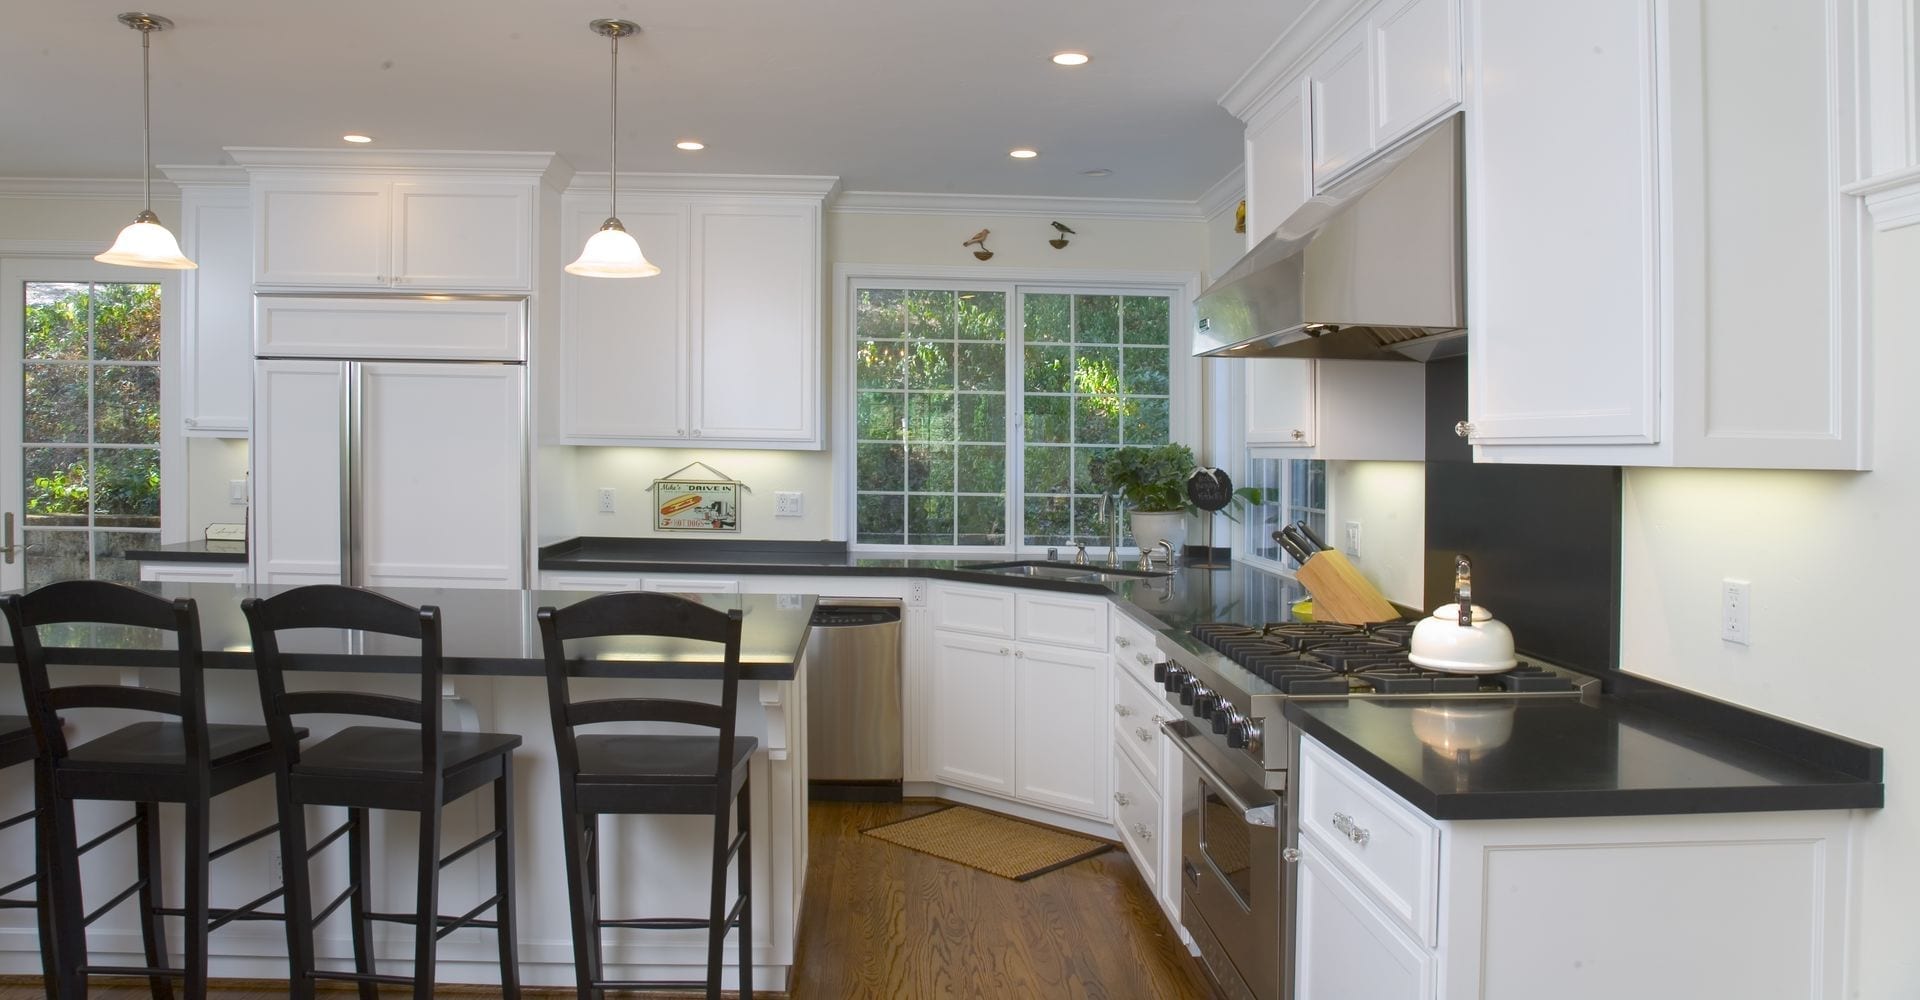 The Costs Of A Kitchen Remodel 4 Tips, How Much Does It Cost To Remodel A Kitchen In California